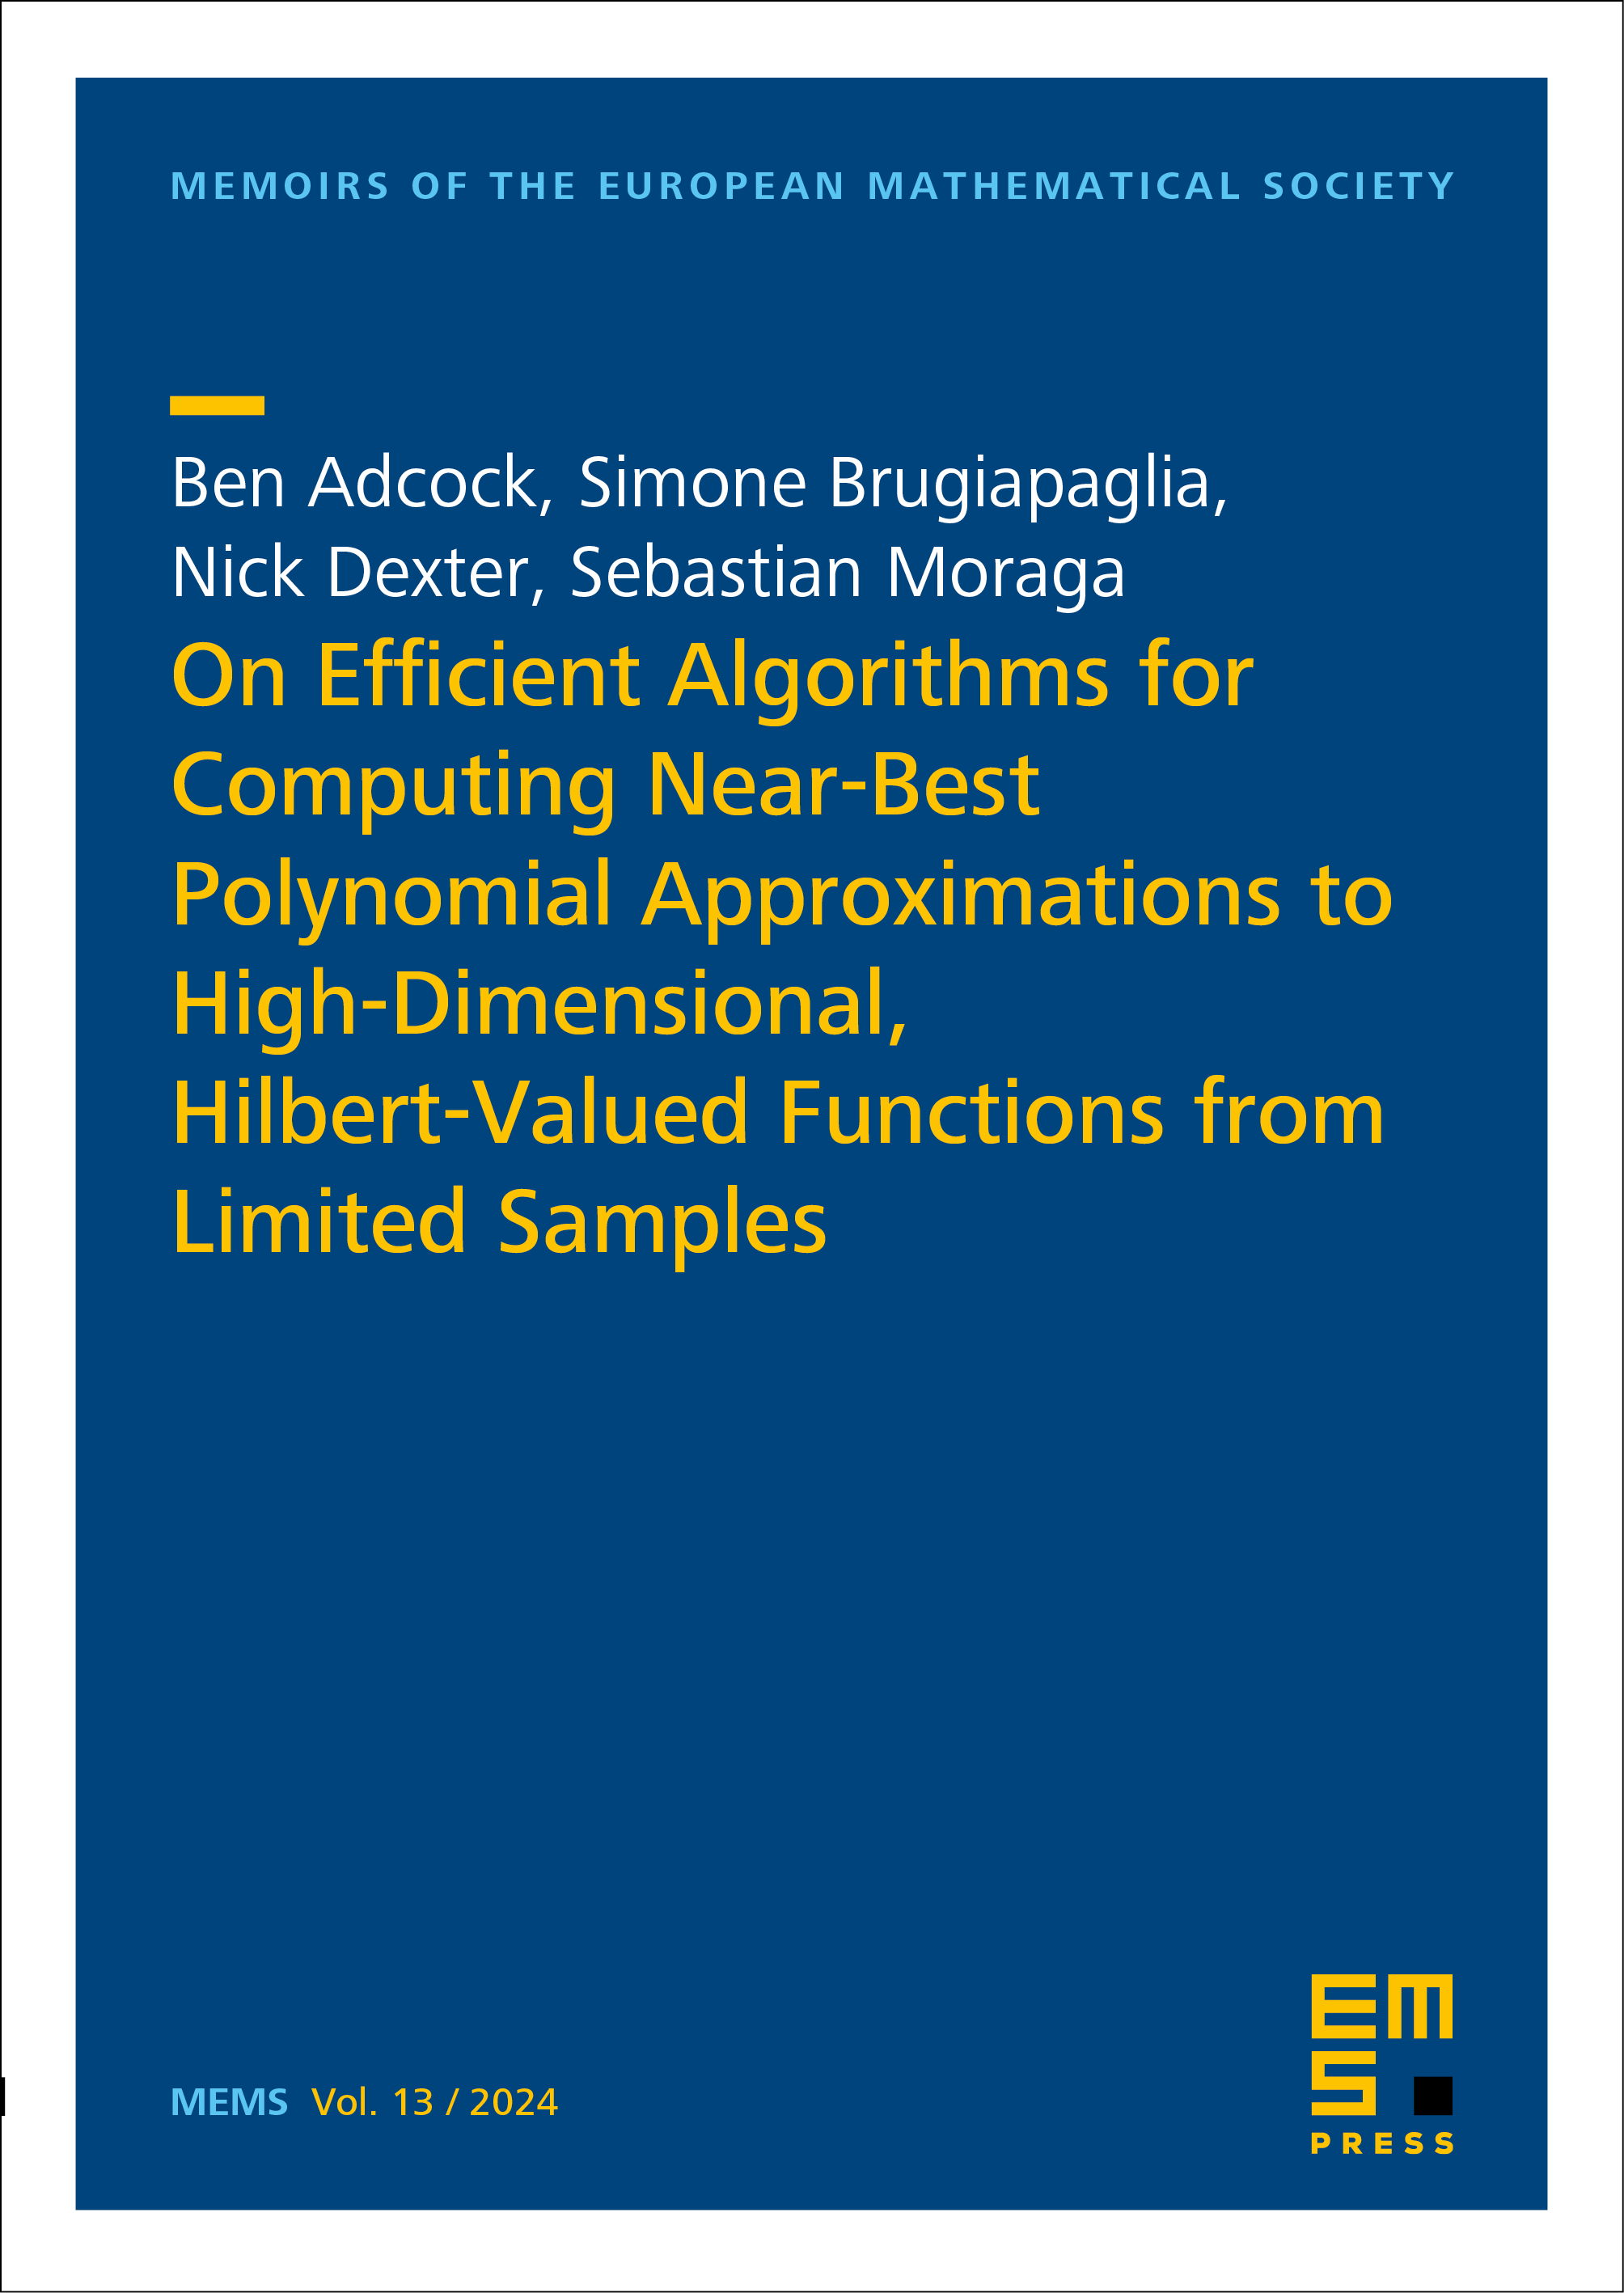 On Efficient Algorithms for Computing Near-Best Polynomial Approximations to High-Dimensional, Hilbert-Valued Functions from Limited Samples cover